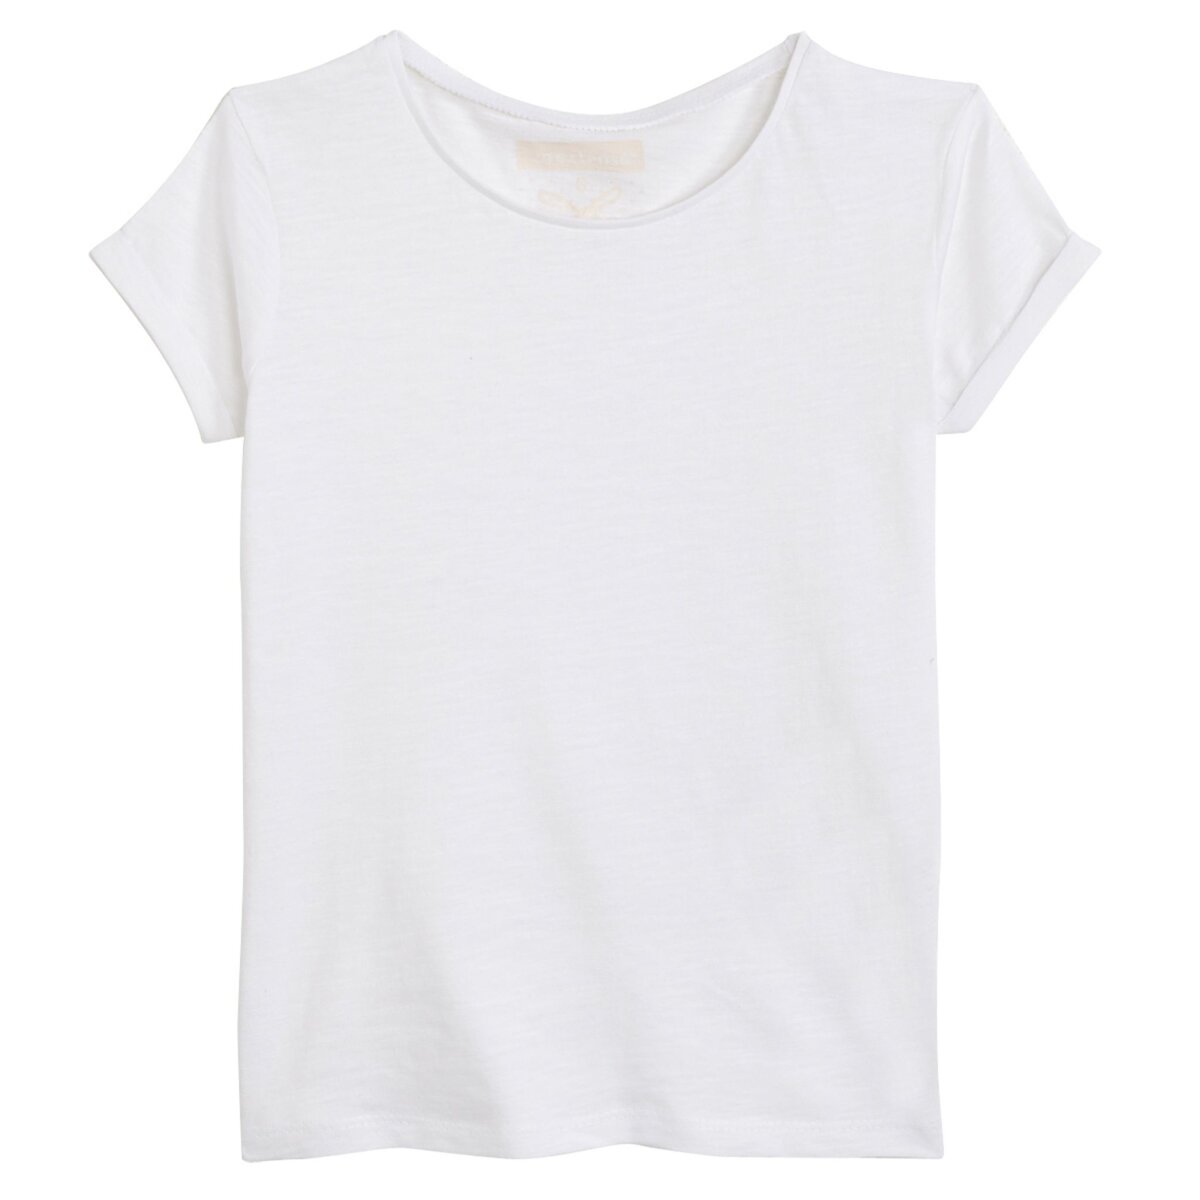 IN EXTENSO Tee-shirt manches courtes uni fille